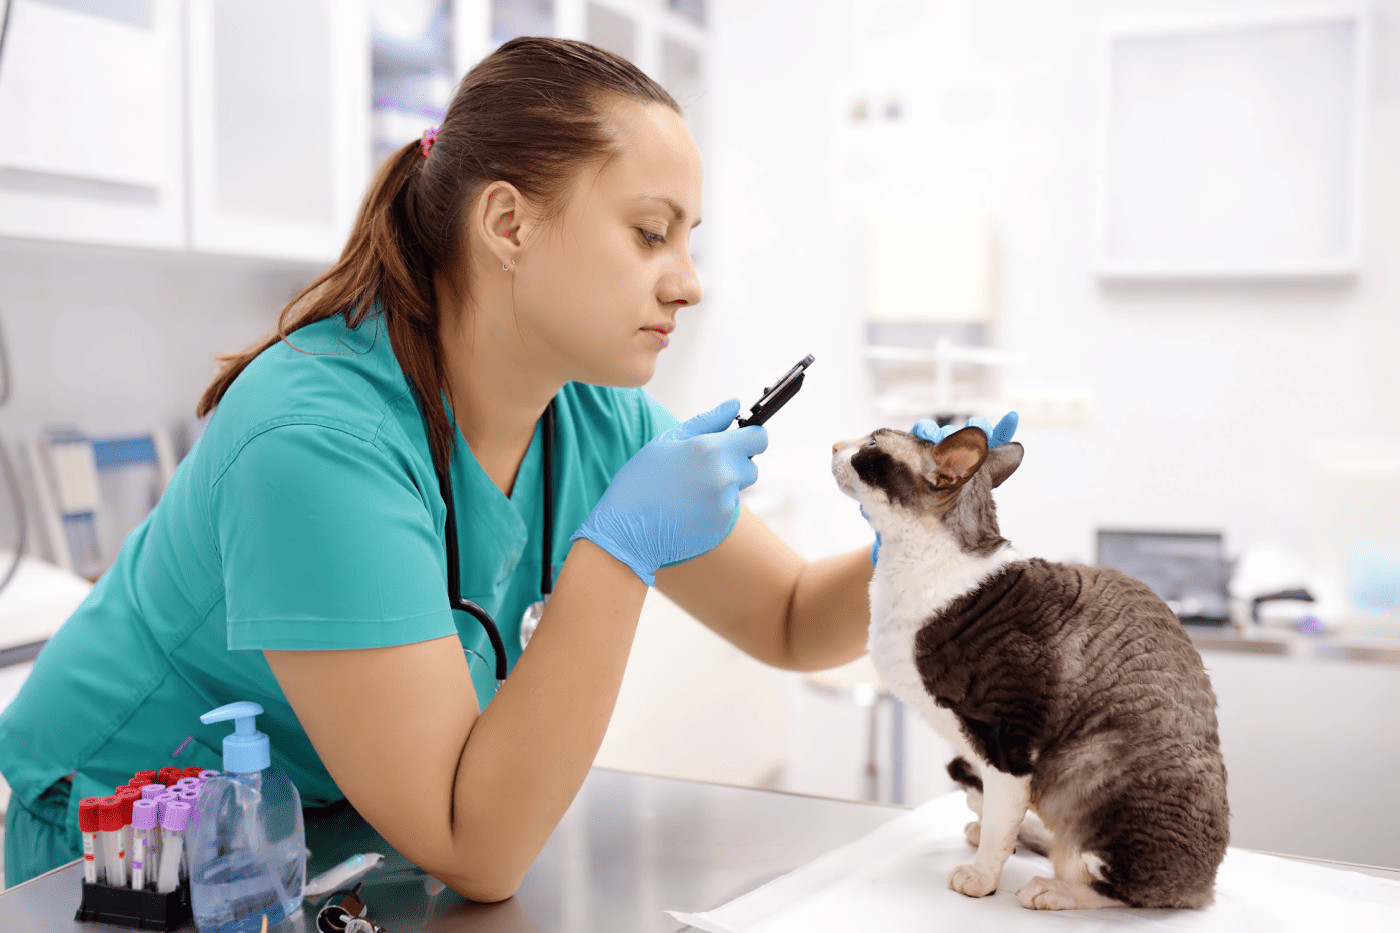 Veterinary doctor checks eyesight of a cat of the breed Cornish Rex in a veterinary clinic